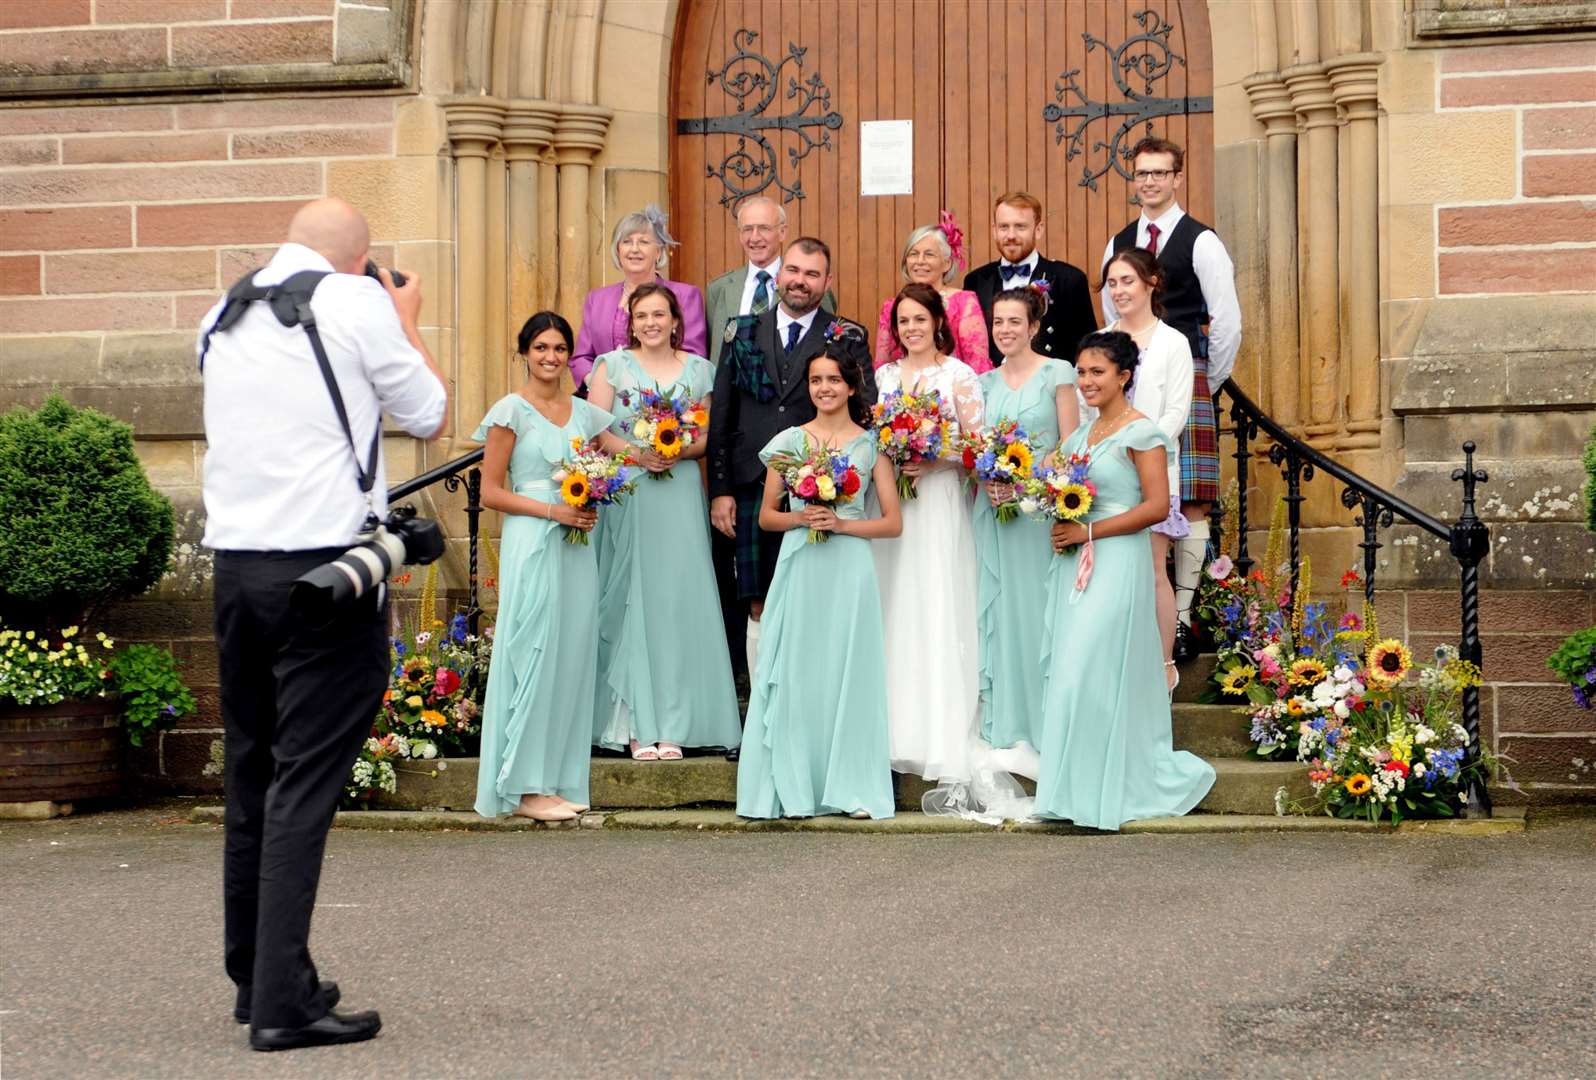 The wedding party. Picture: James Mackenzie